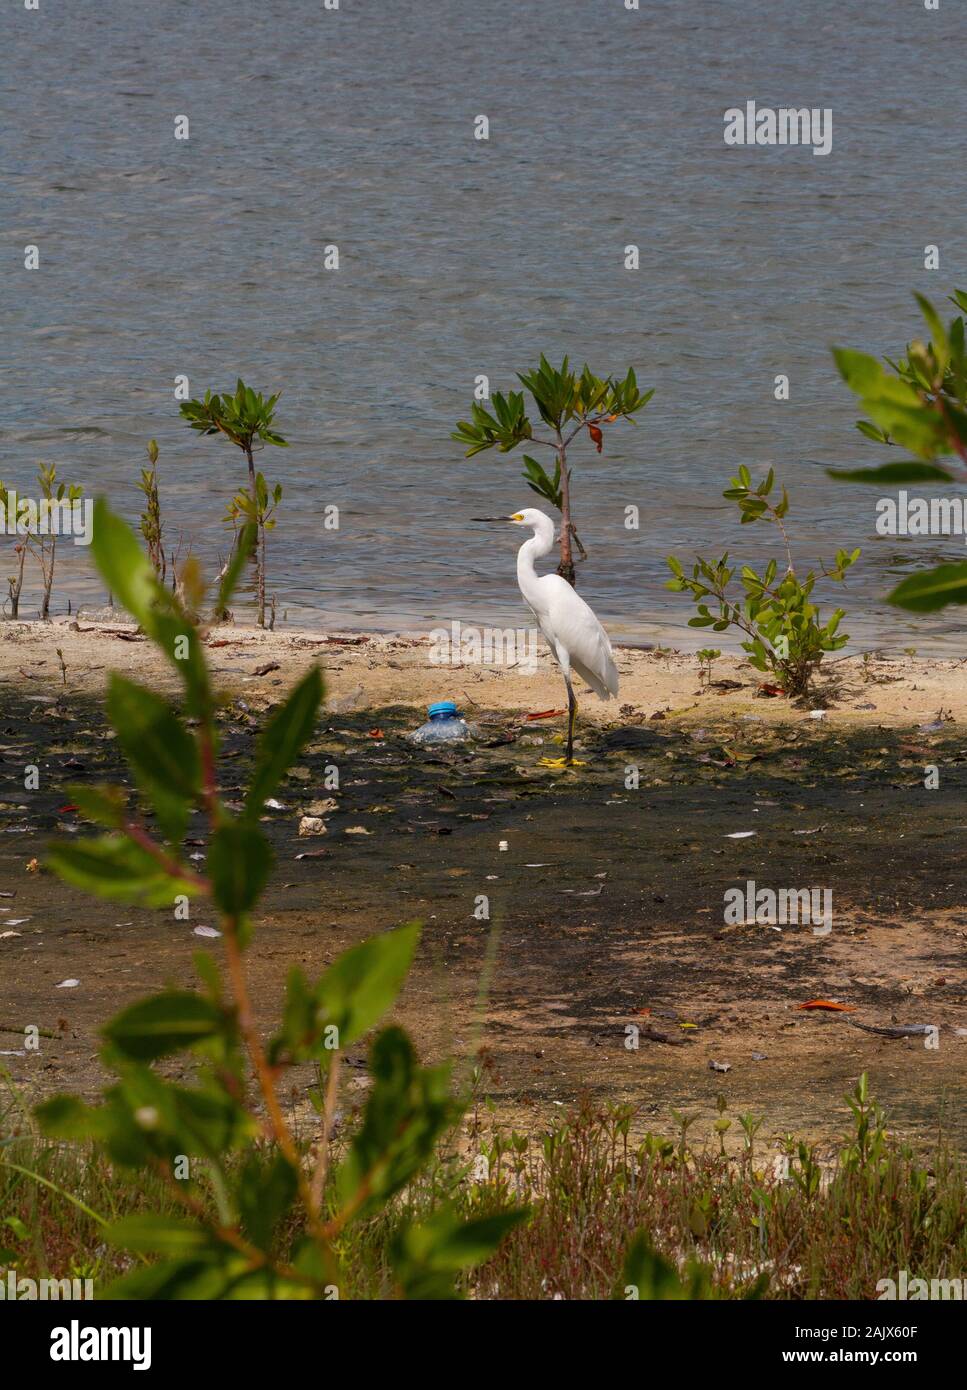 Snowy Egret on shore with Plastic Stock Photo